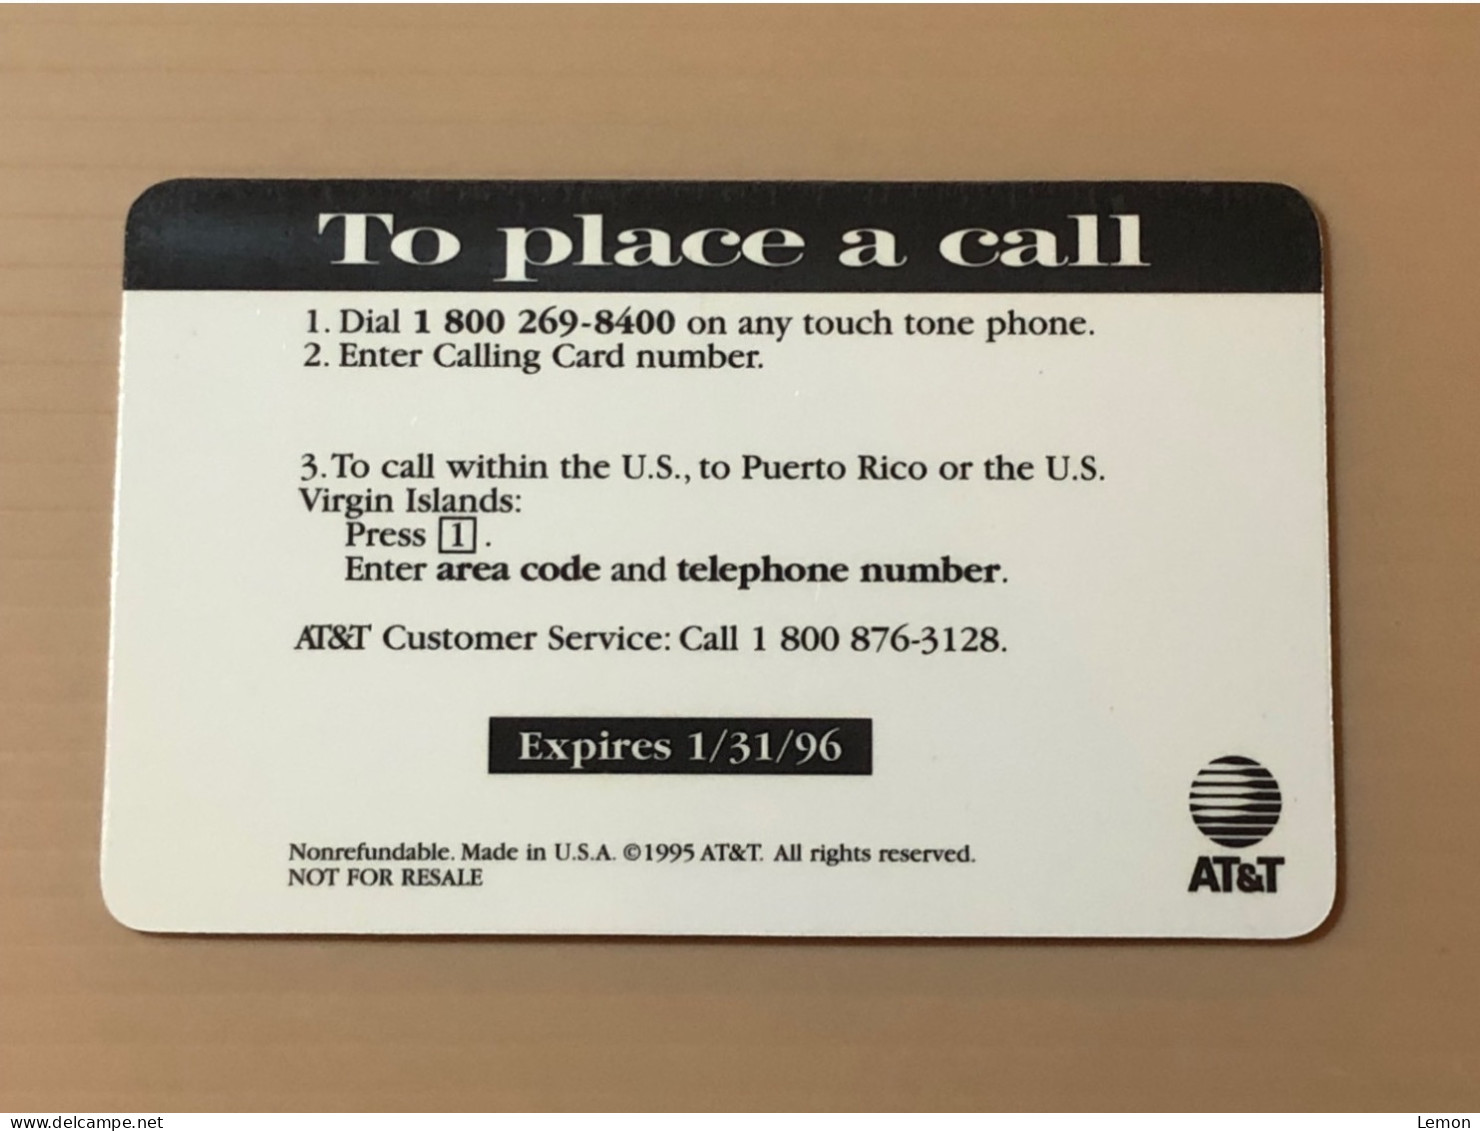 Mint USA UNITED STATES America Prepaid Telecard Phonecard, AT&T Annual Top Cops Award SAMPLE CARD, Set Of 1 Mint Card - Verzamelingen